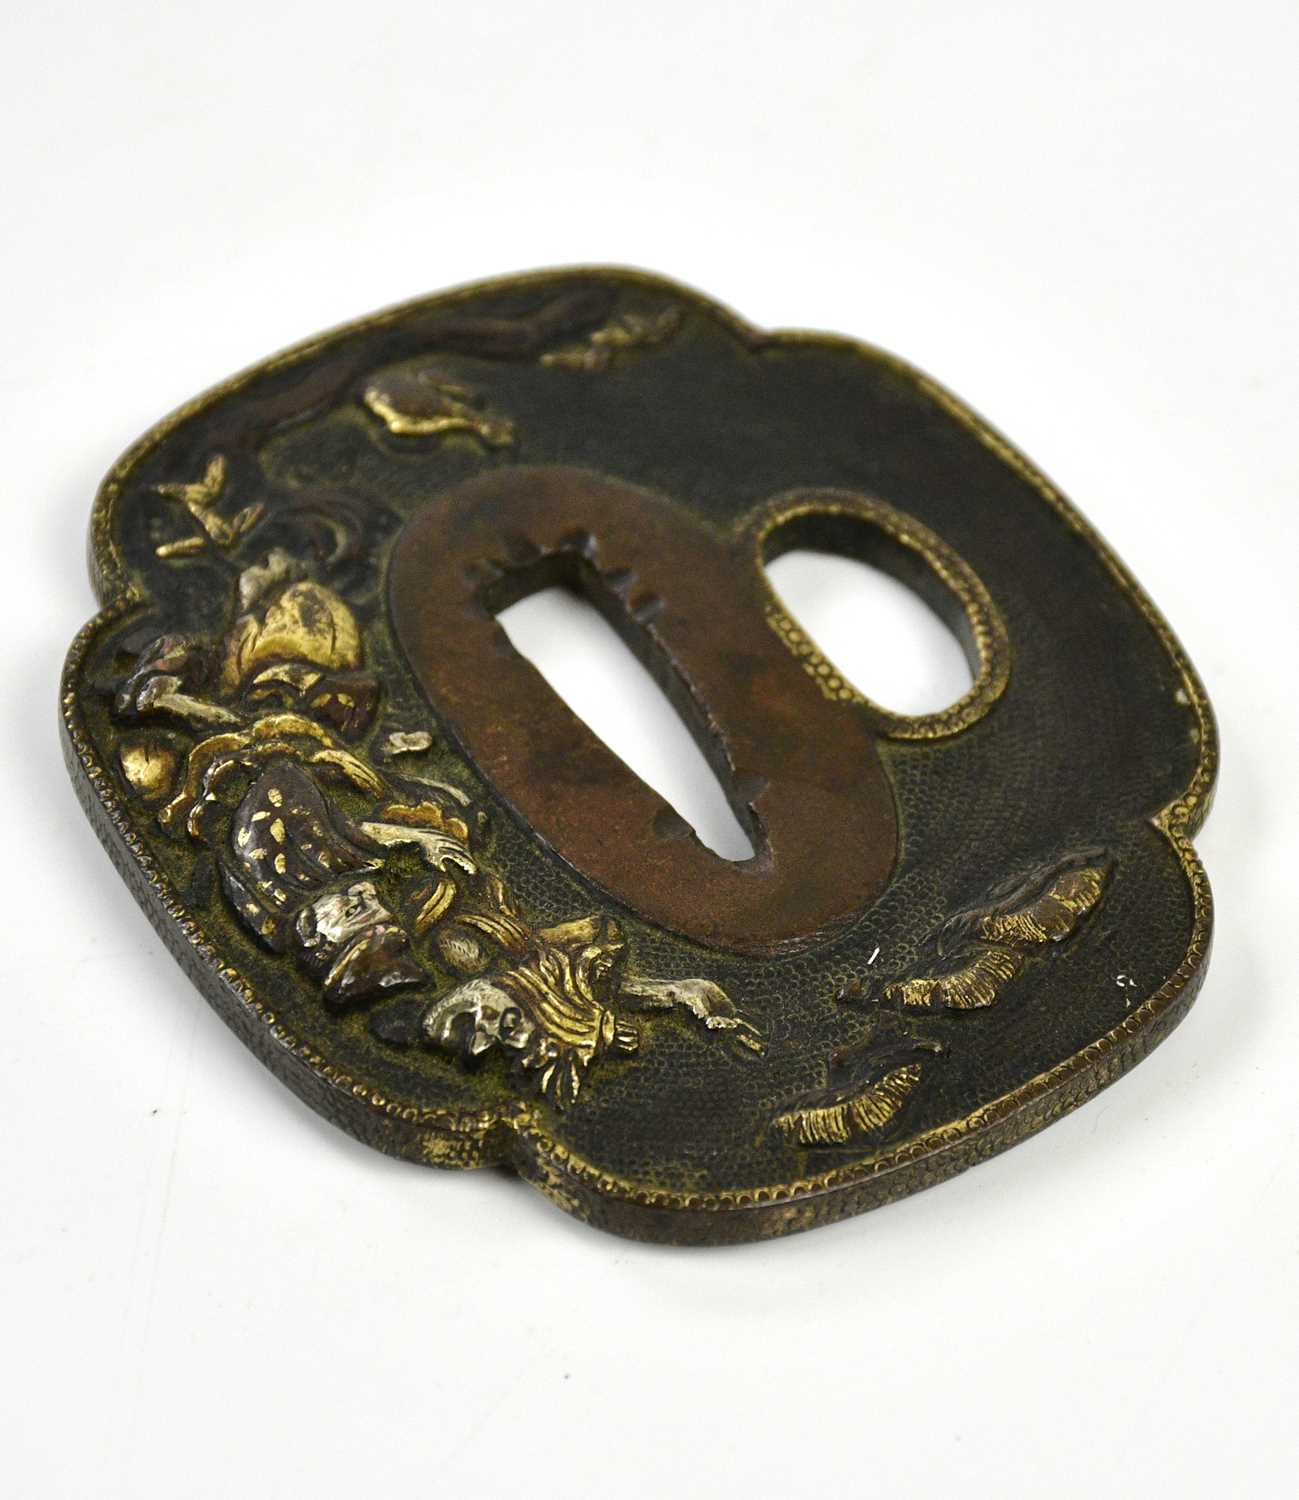 A Japanese bronze tsuba with gilt highlights, approx 7 x 6cm.